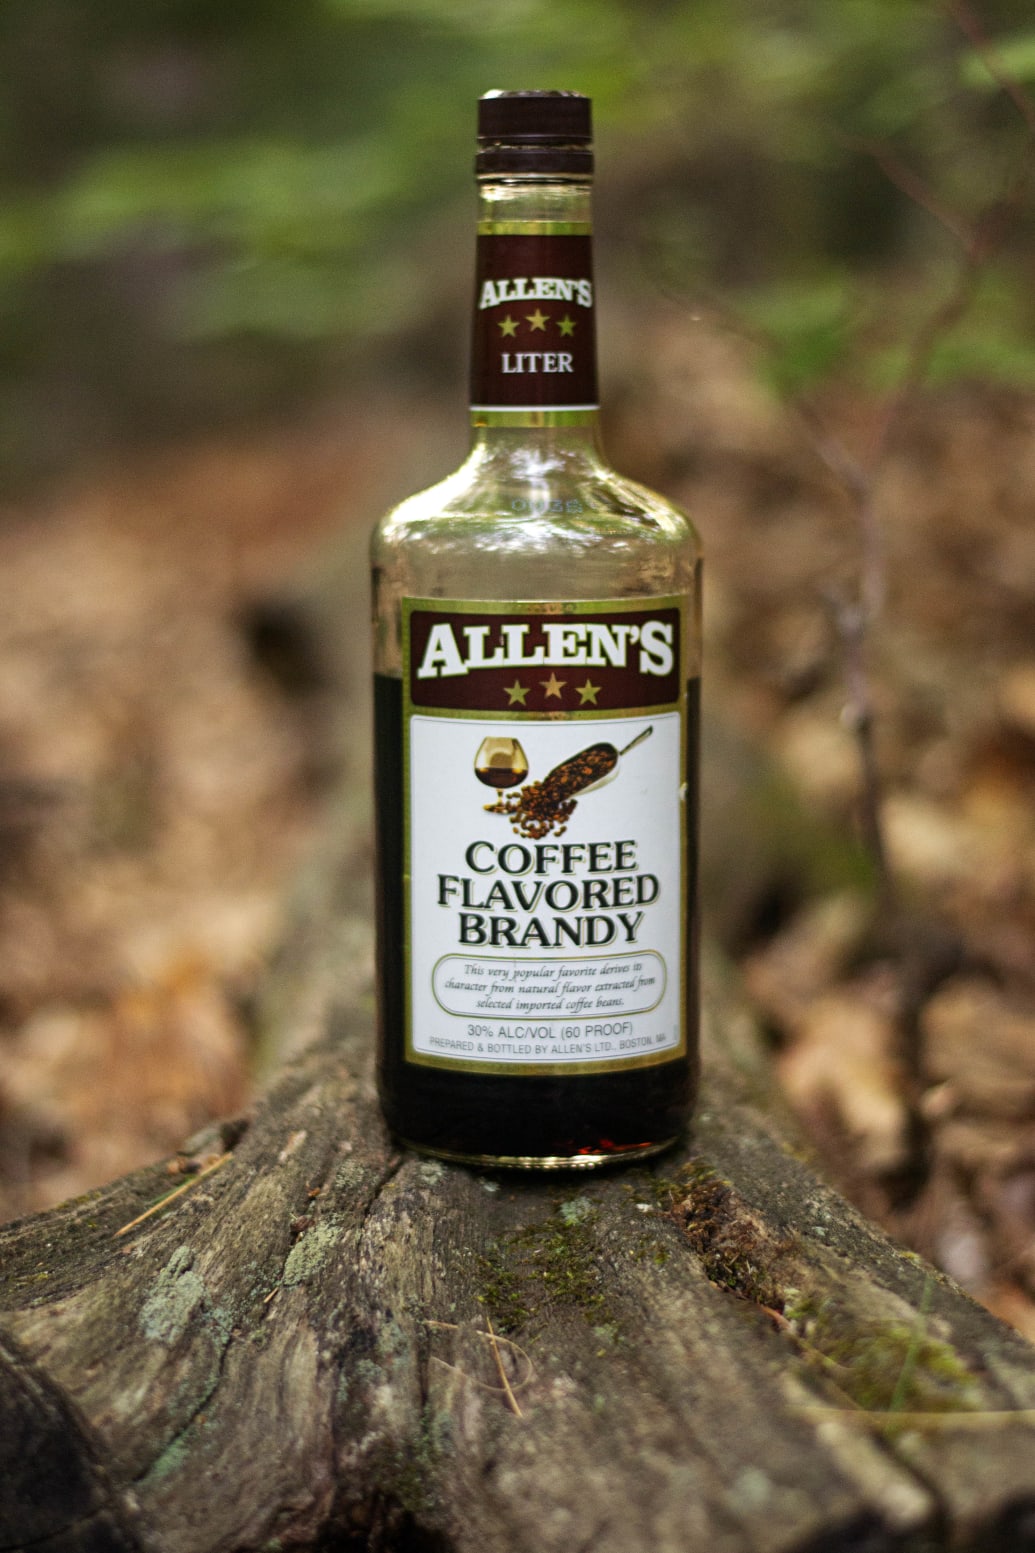 Maine’s Obsession With Allen’s Coffee Flavored Brandy